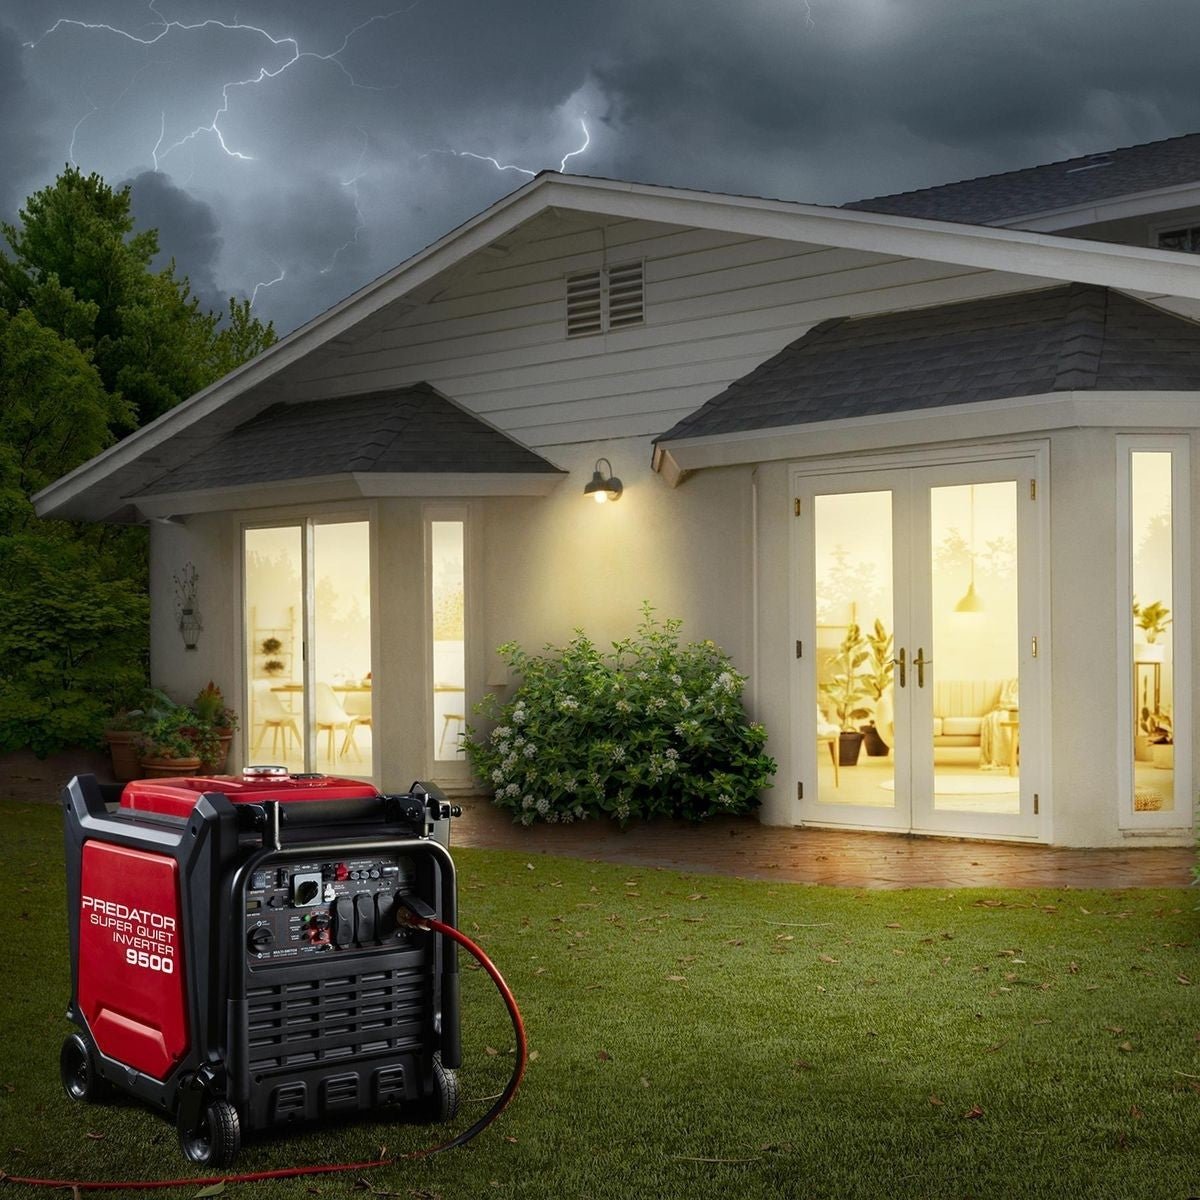 Plan for the Unexpected: Protecting Your Home from Weather Emergencies